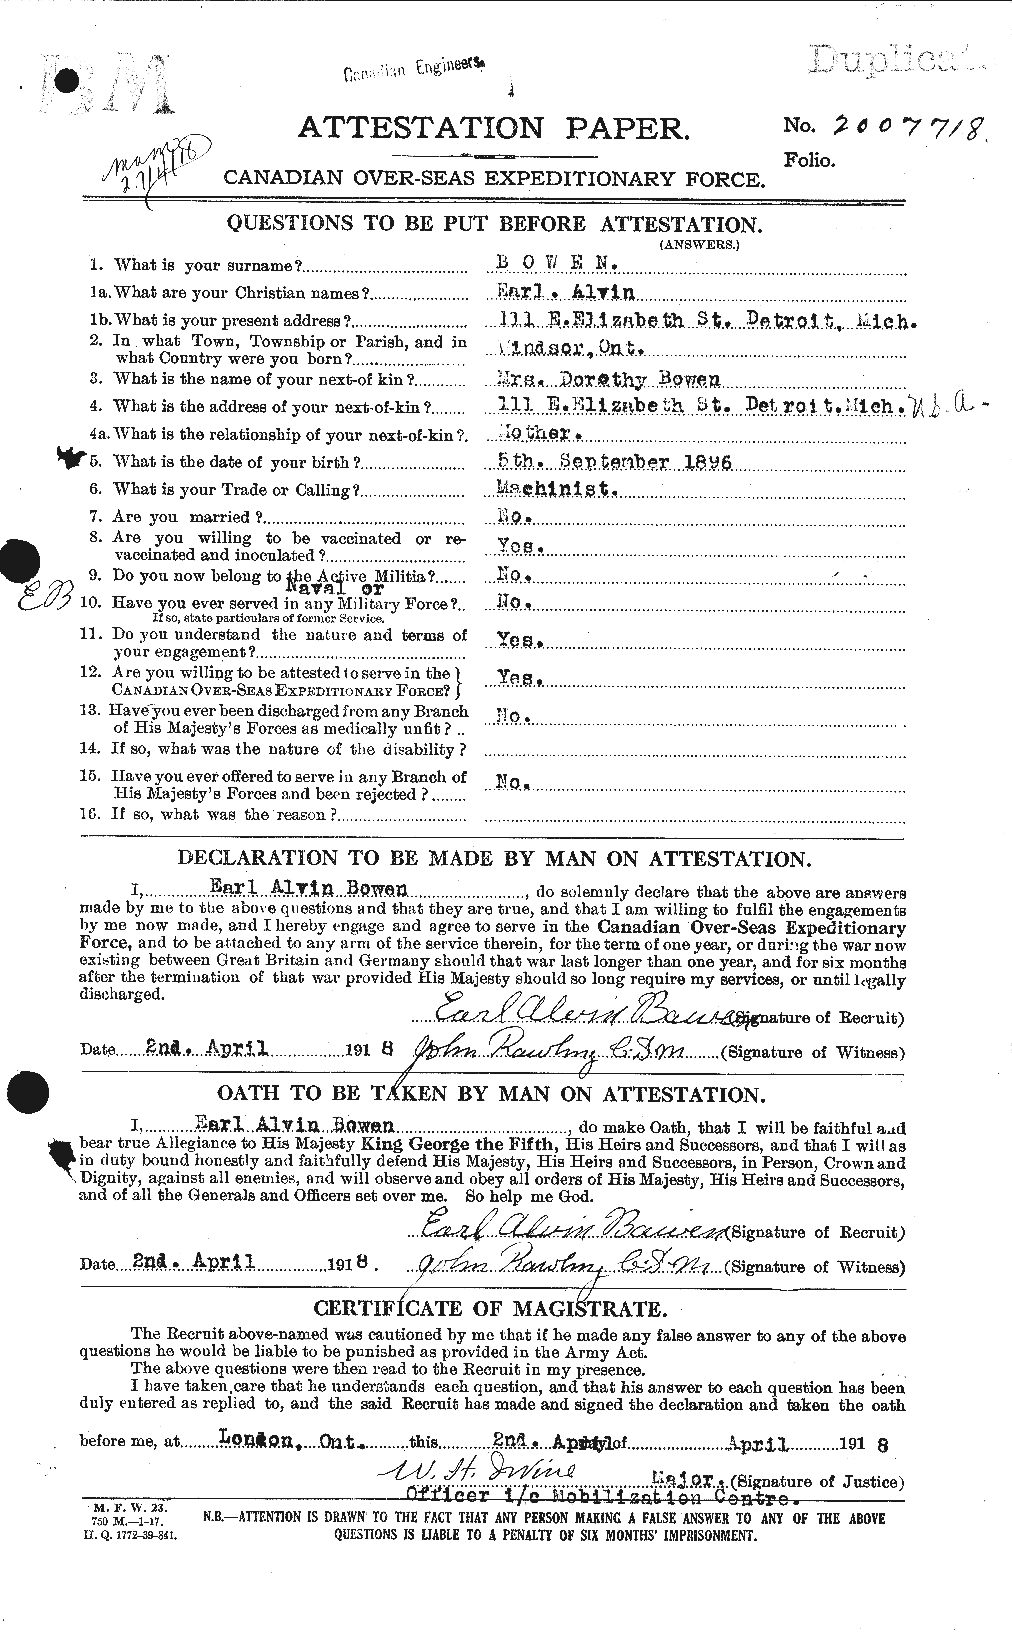 Personnel Records of the First World War - CEF 255377a